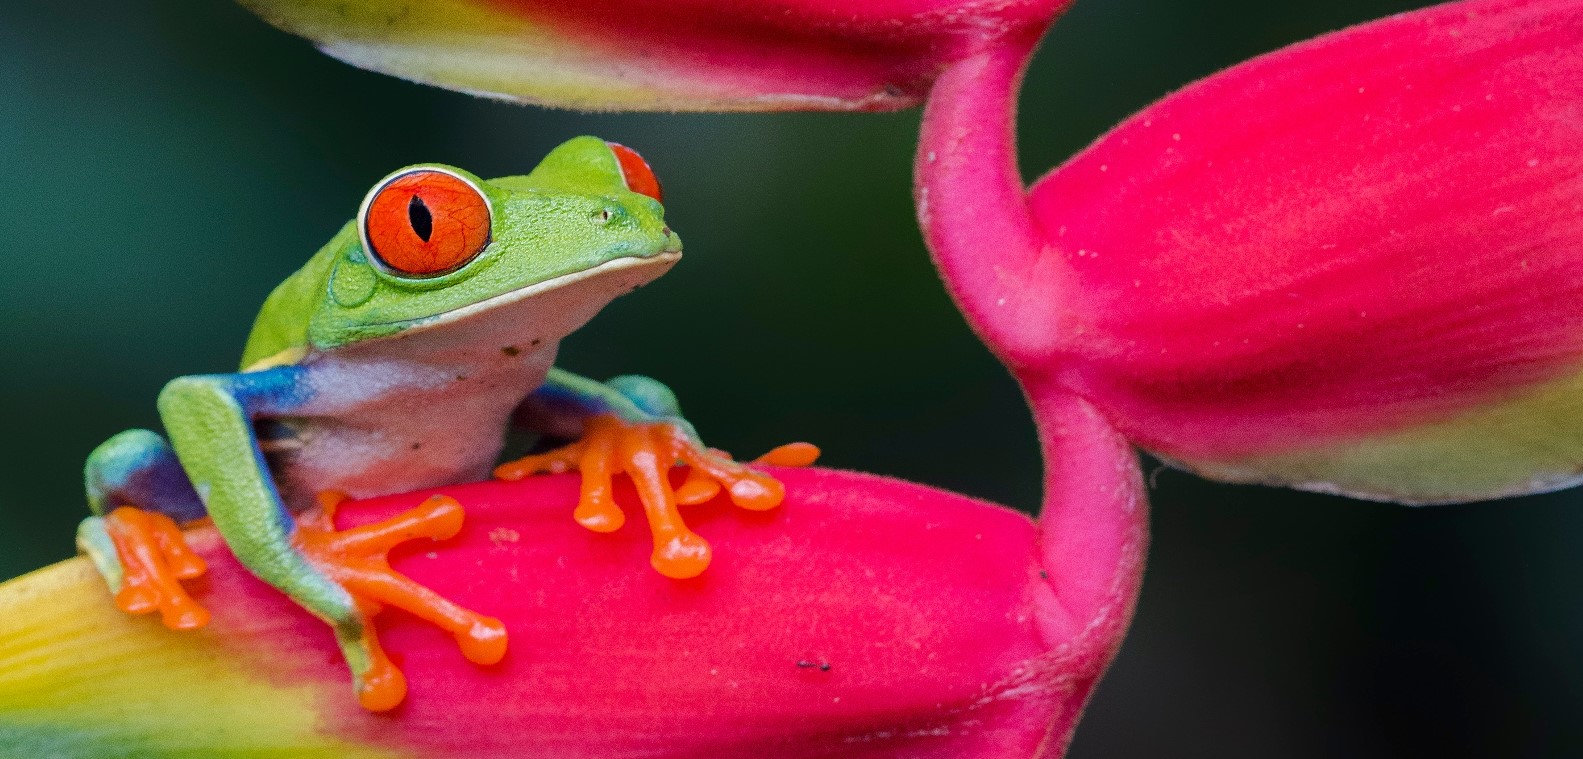 Small green frog with bulging red eyes and orange fingers sitting on bright pink flower